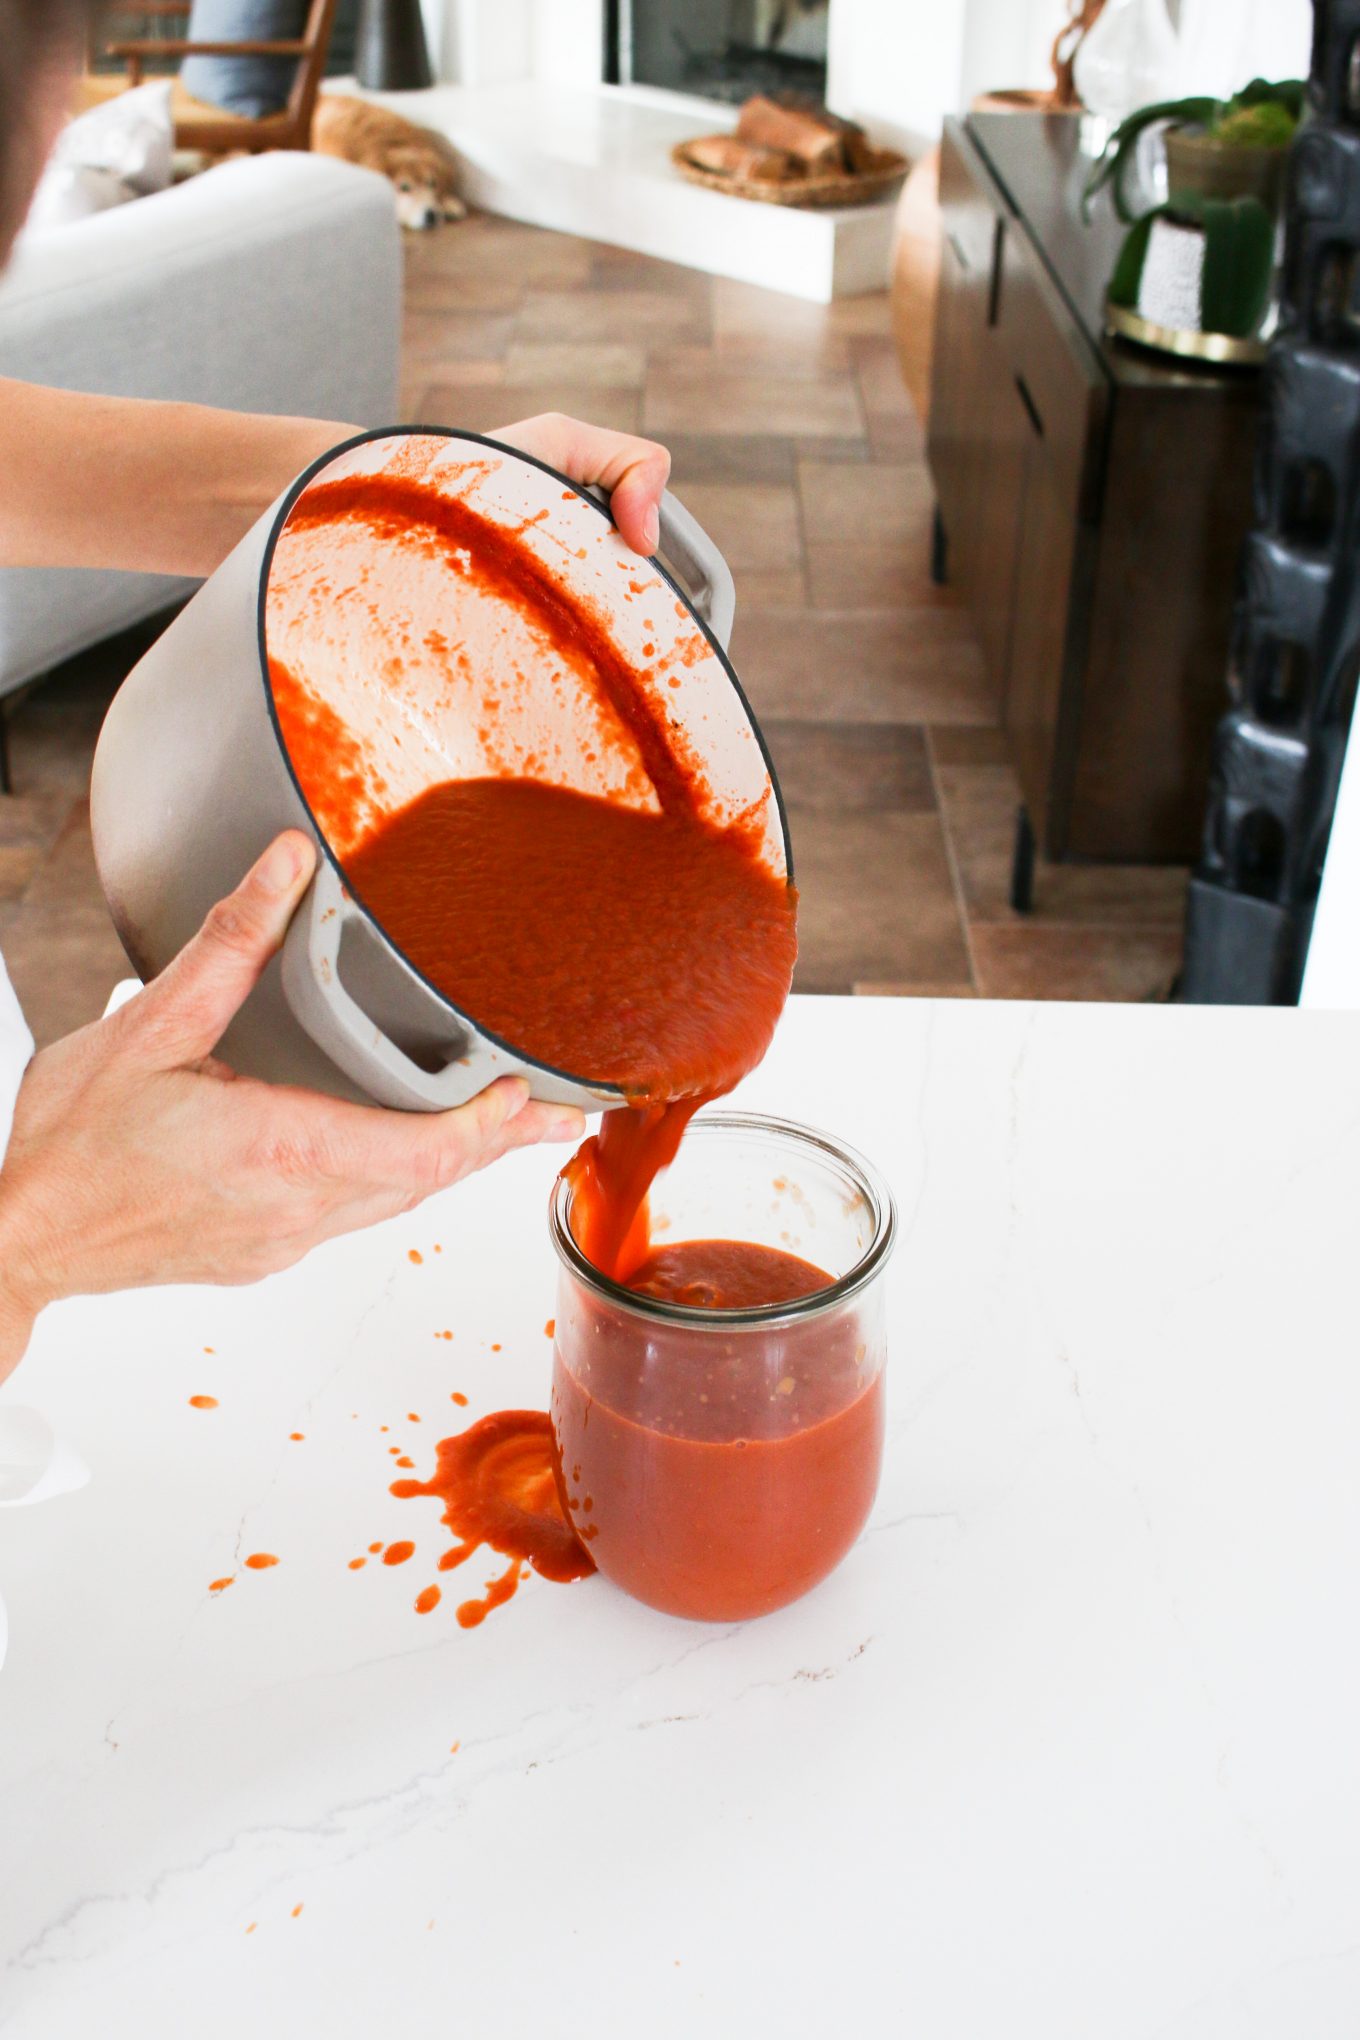 Vegan homemade red enchilada sauce being poured in a glass container.